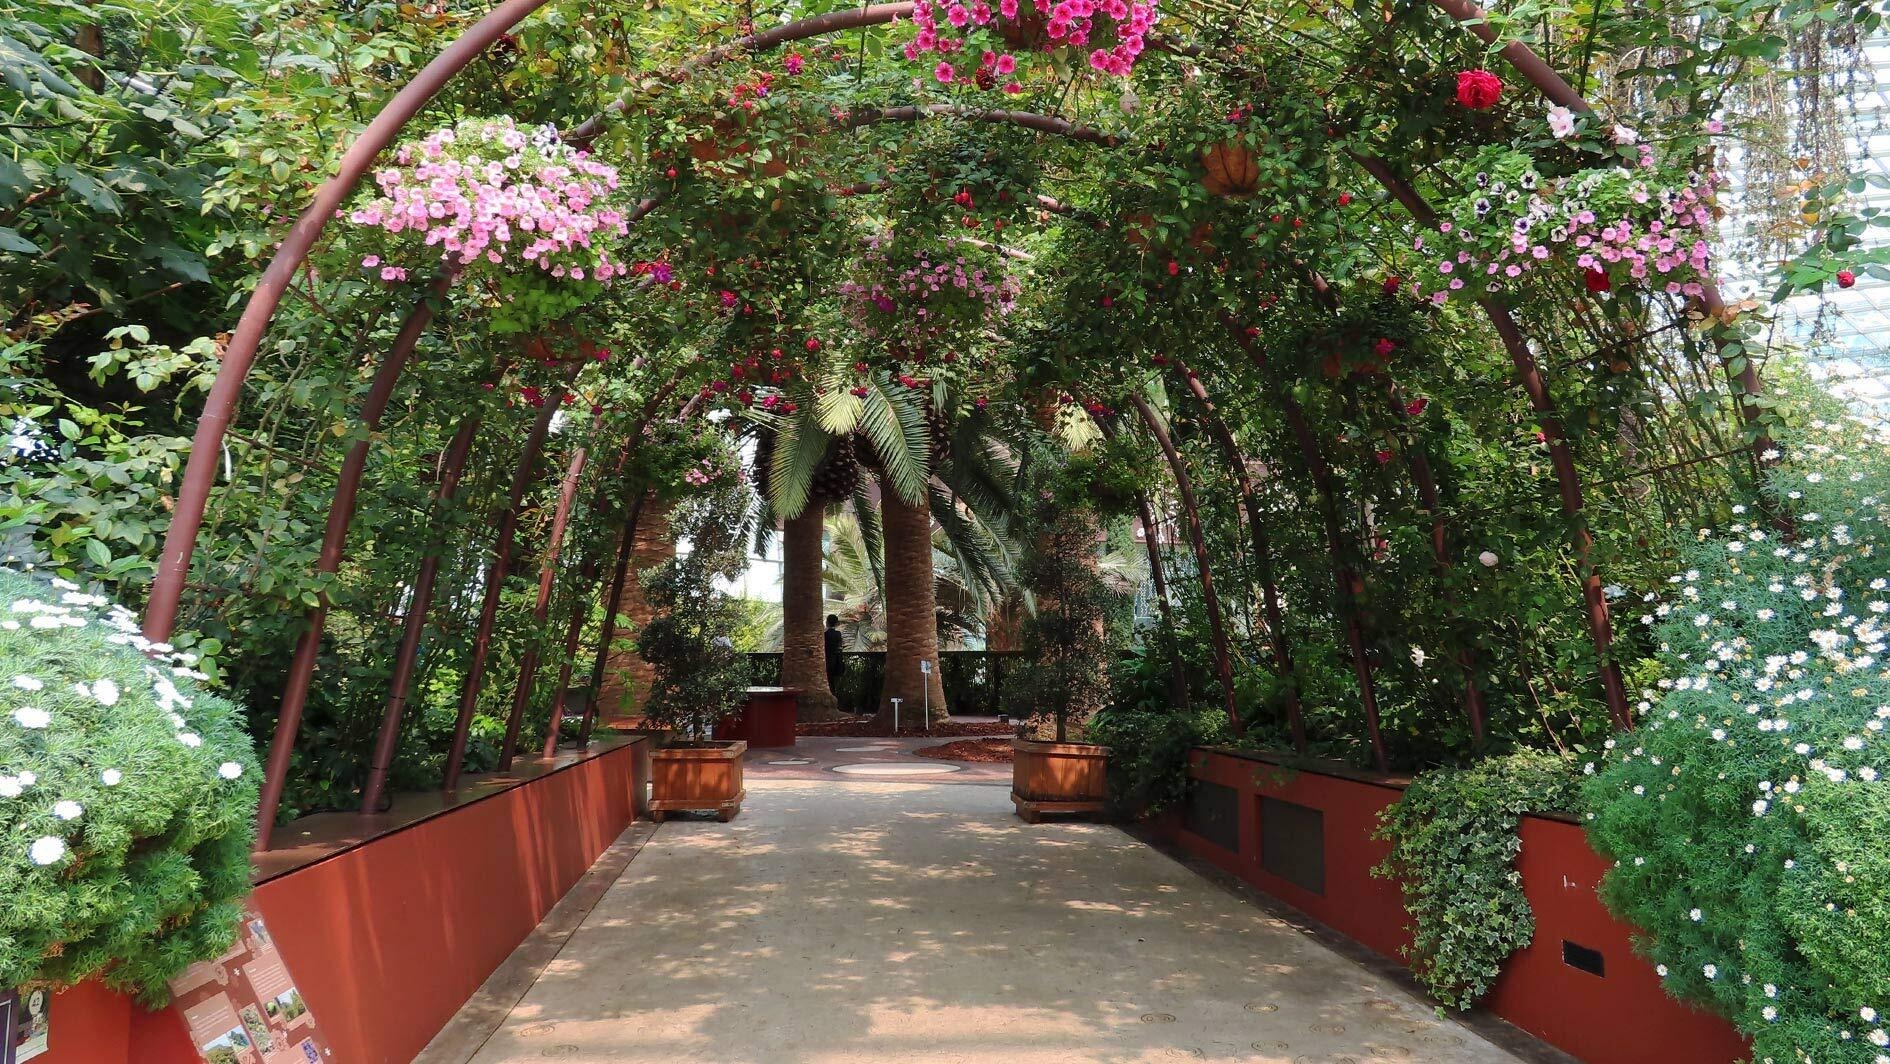 An image of a tunnel in a garden made from greenery. There are light and dark pink flowers throughout the tunnel as well.